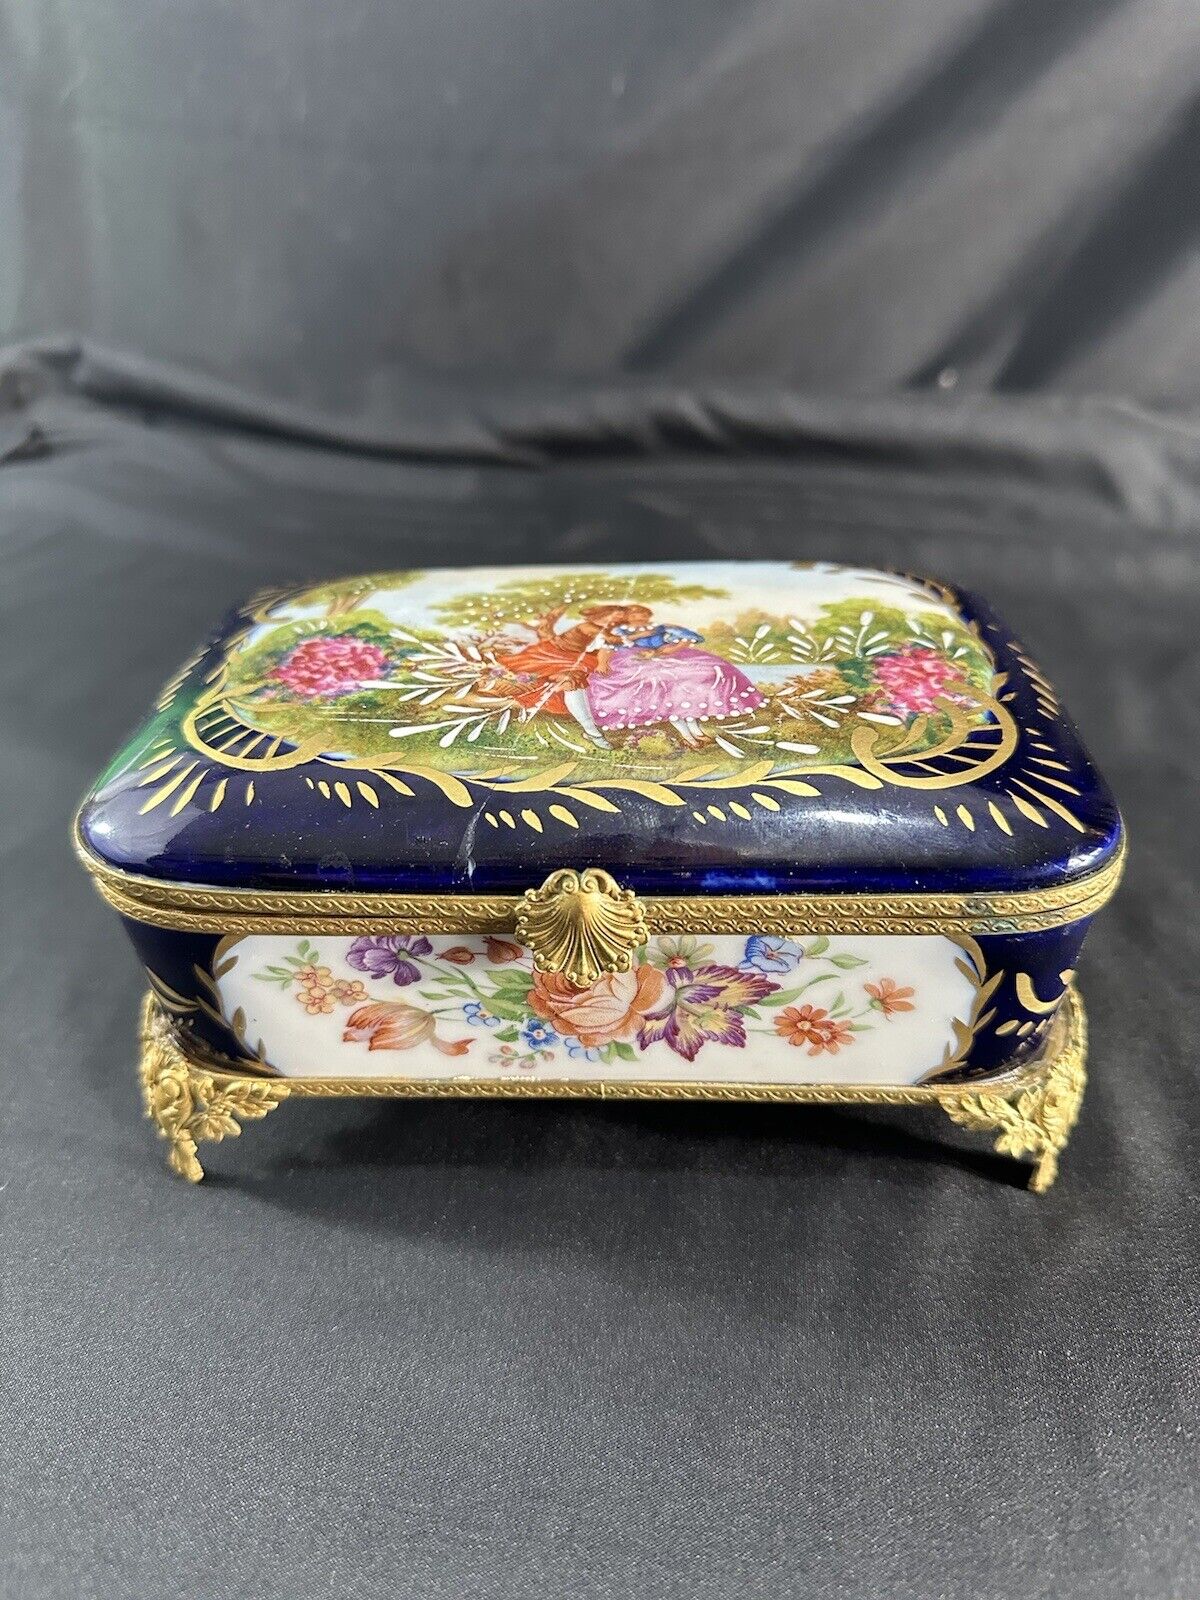 18th CENTURY FRENCH VINCENNES SEVRES PORCELAIN LIDDED DRESSER  JEWELRY BOX